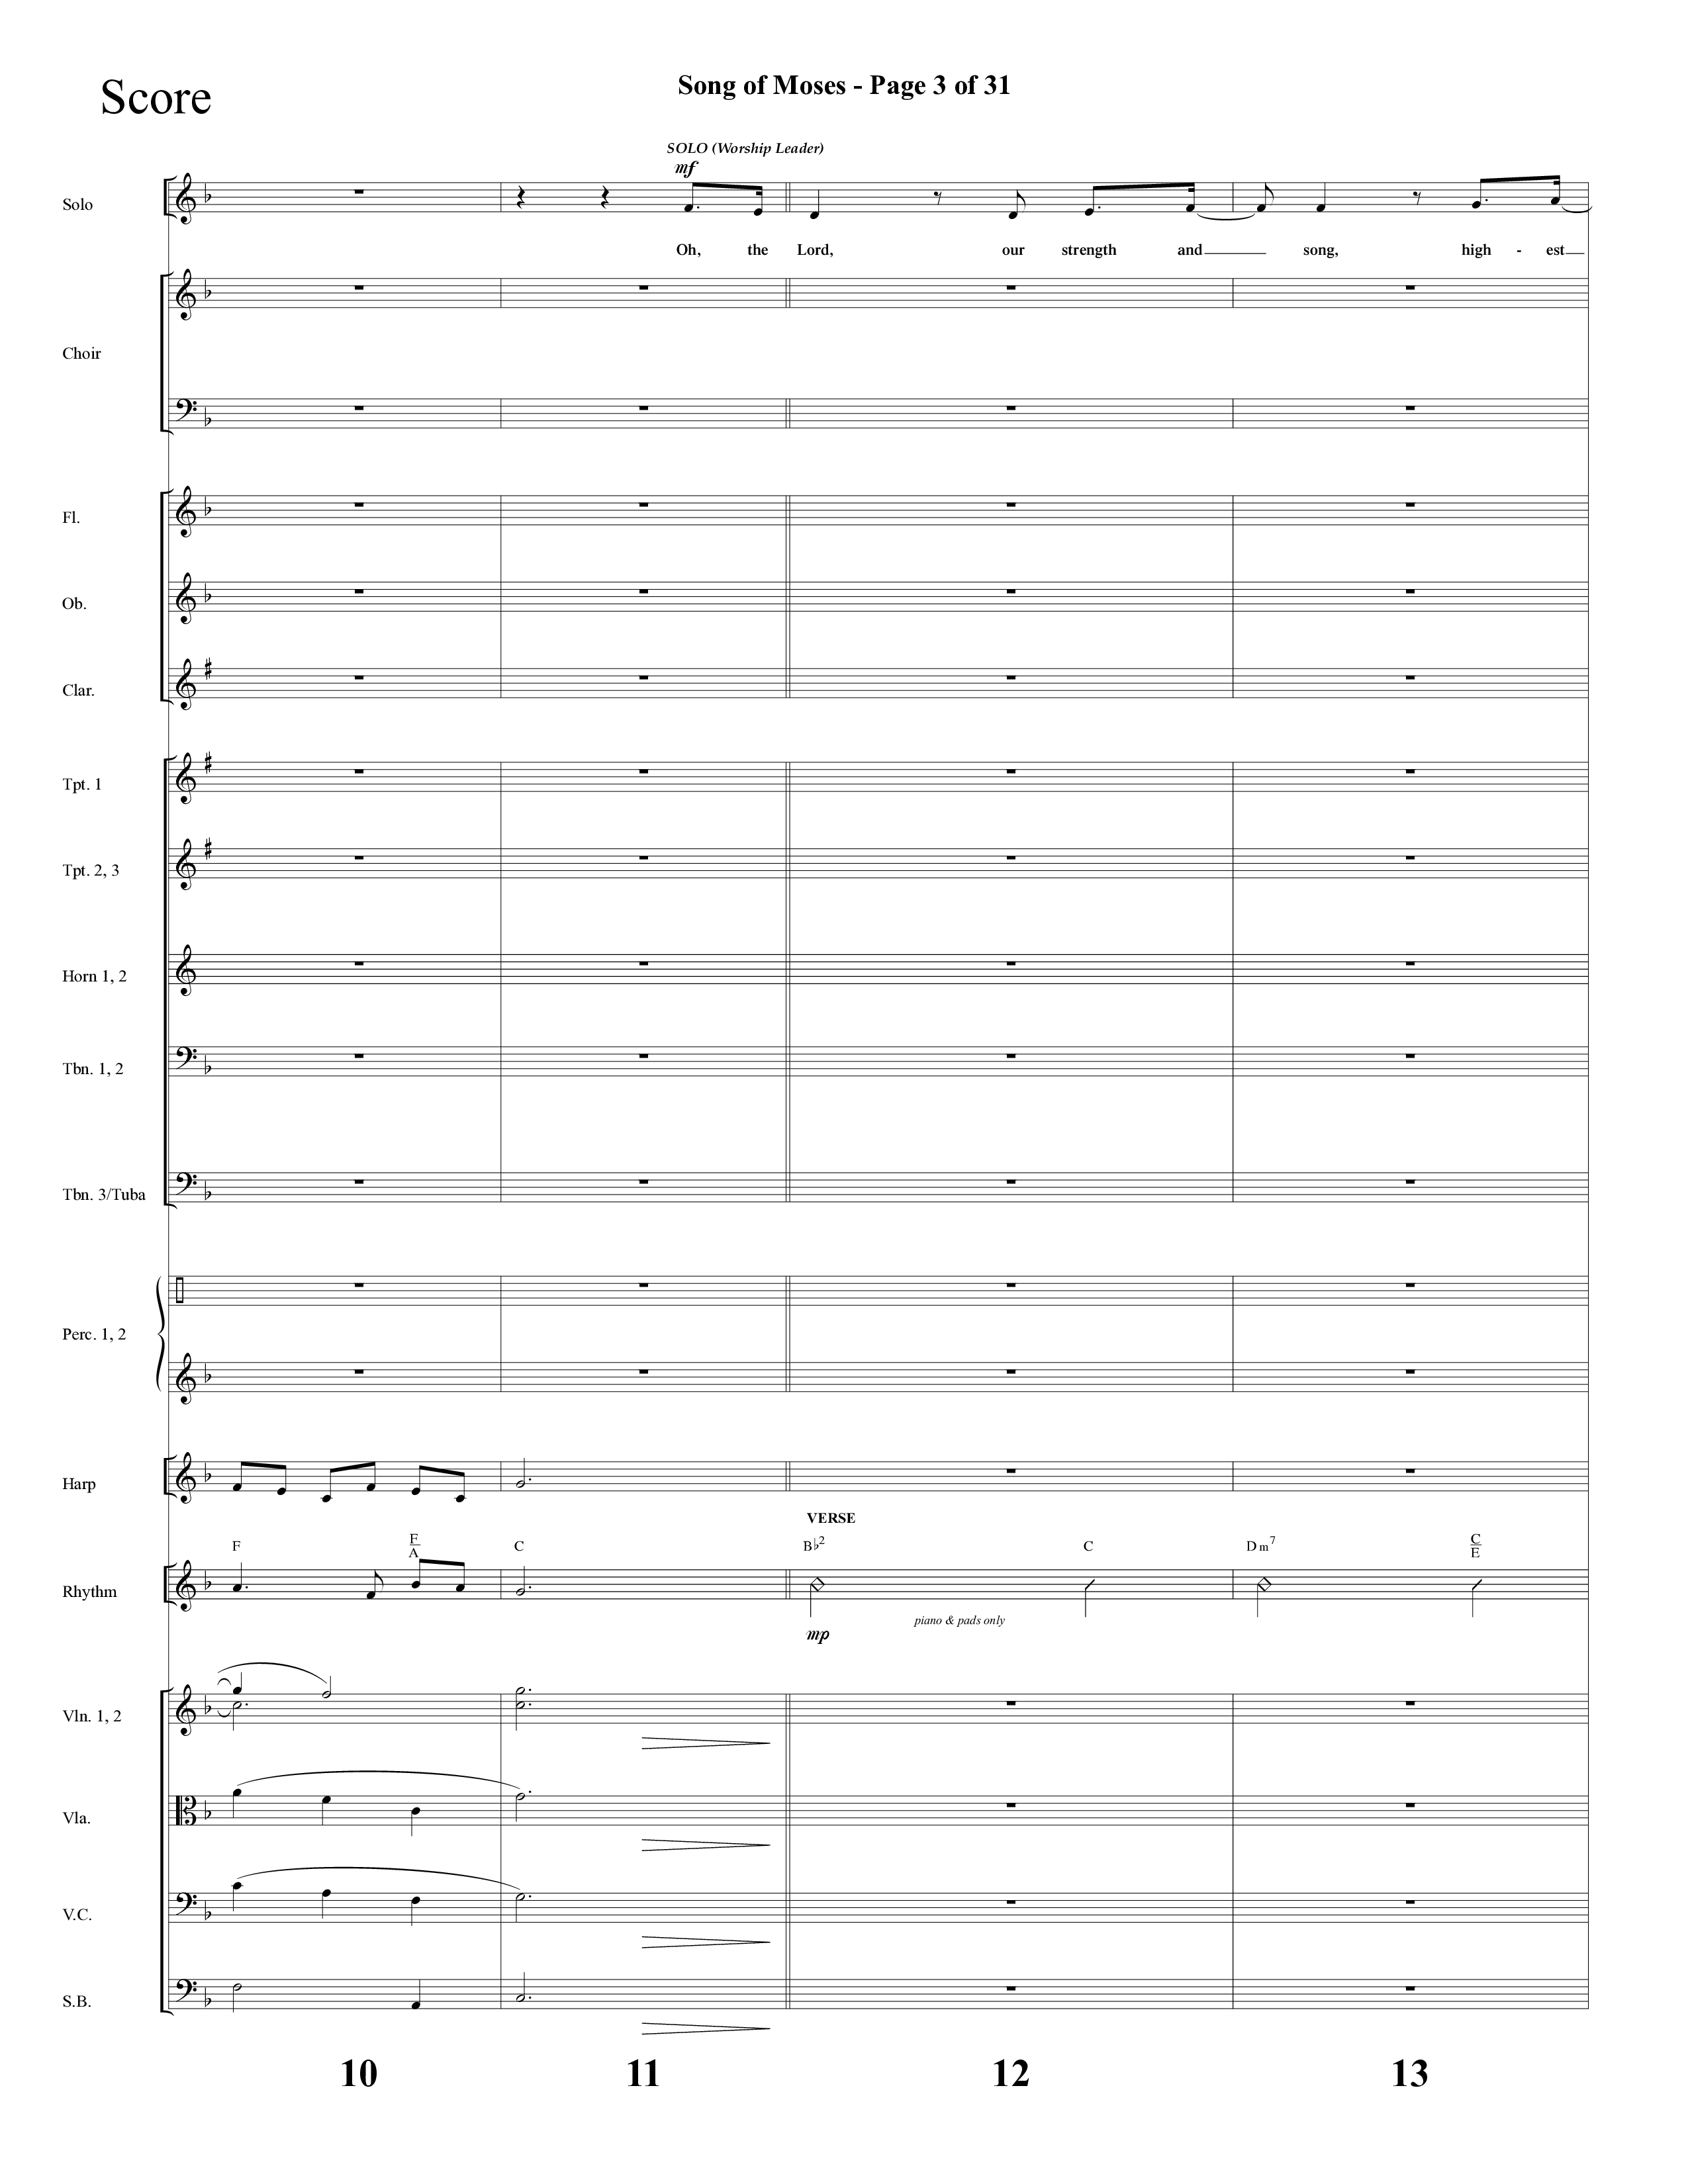 Song Of Moses (Choral Anthem SATB) Orchestration (Lifeway Choral / Arr. Cliff Duren)